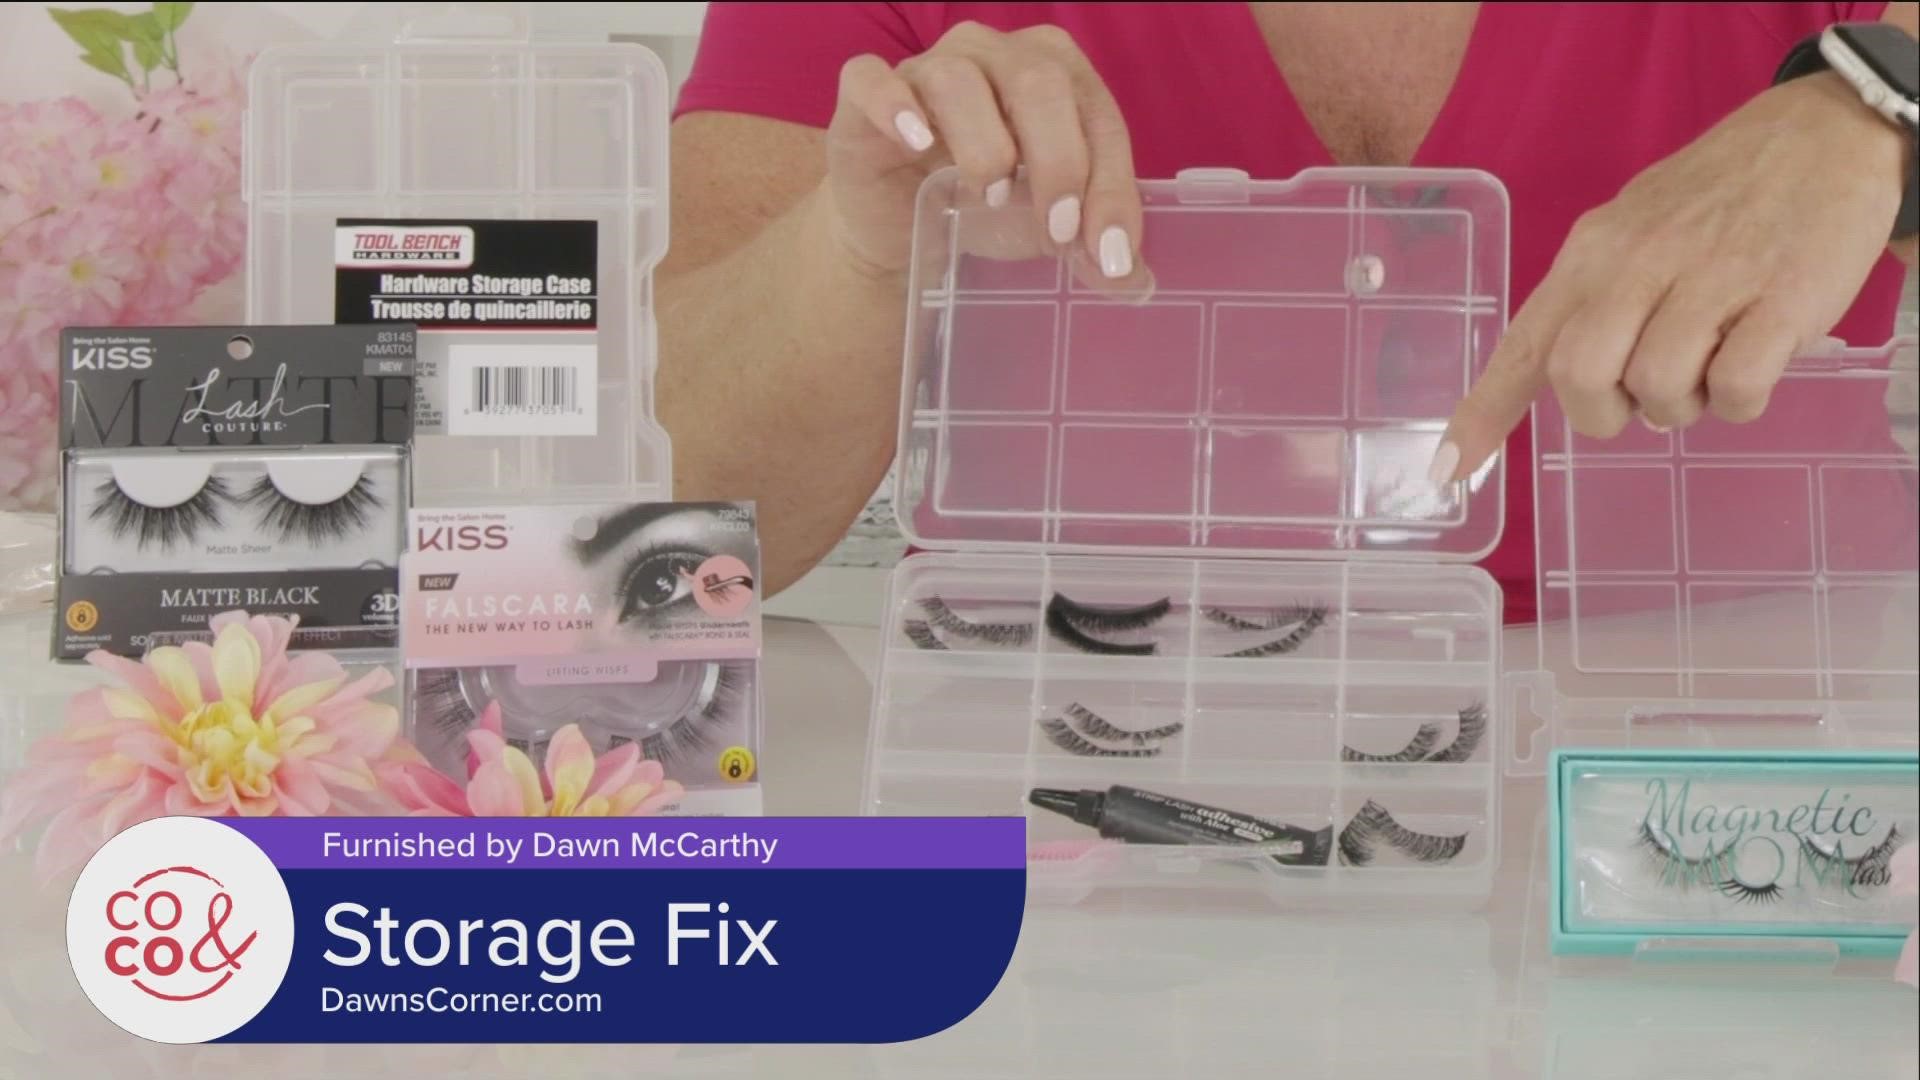 Eye lashes in a tackle box?!? Only Dawn McCarthy can show us how the two go together.